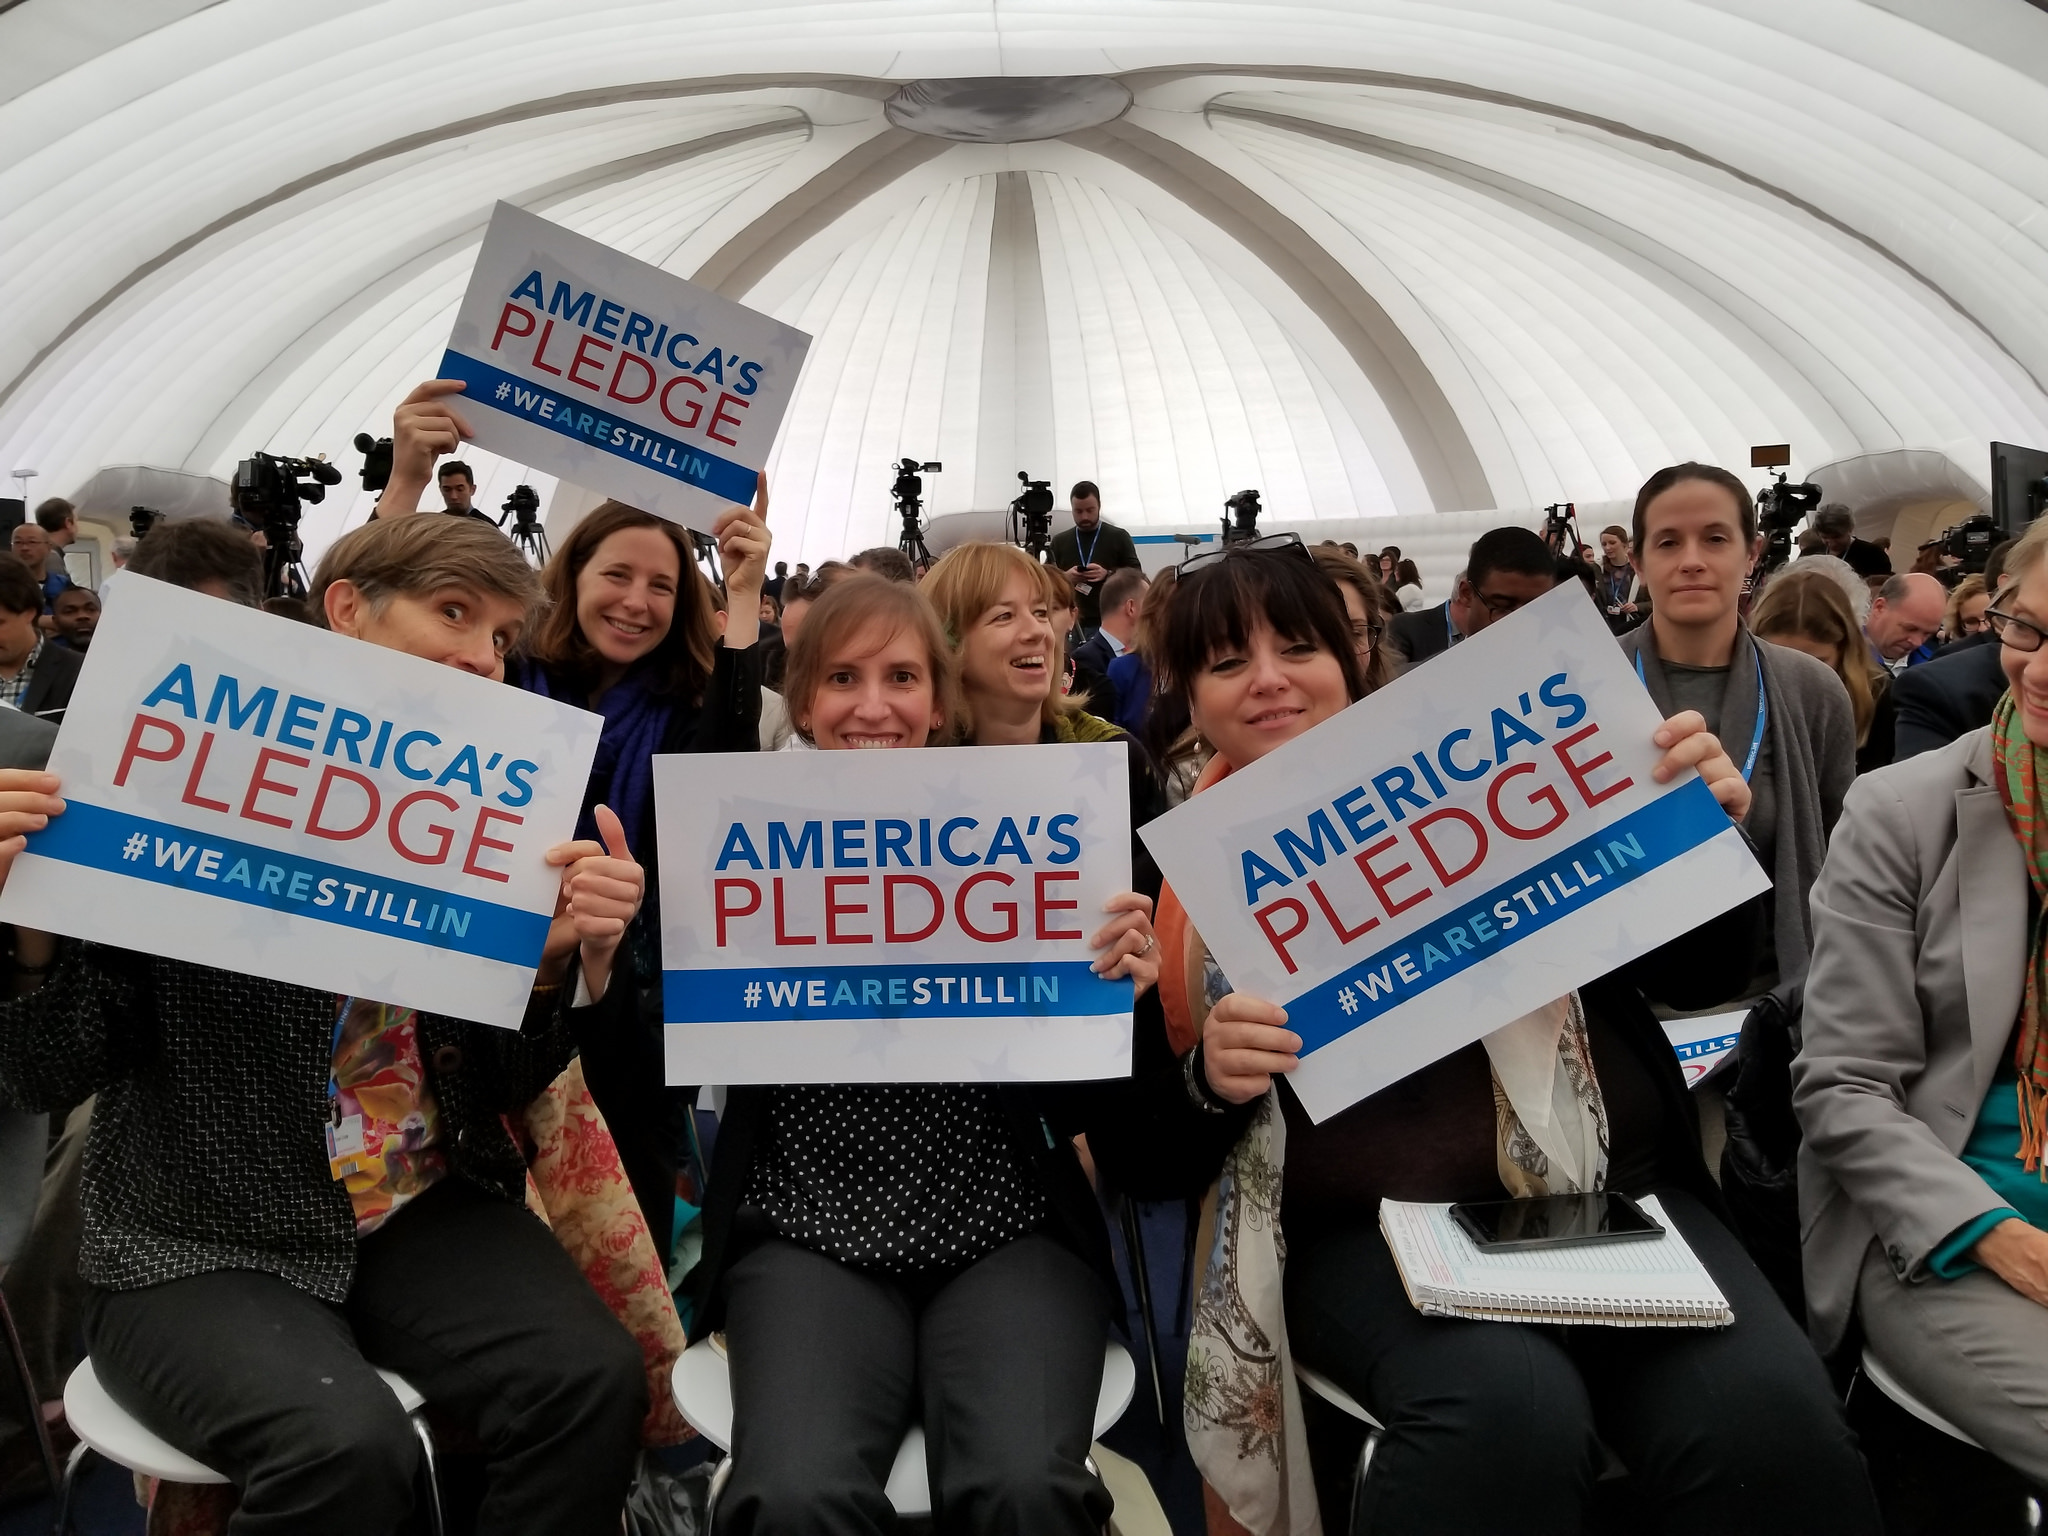 <p>At an event where America's Pledge was announced. Flickr/WRI</p>
